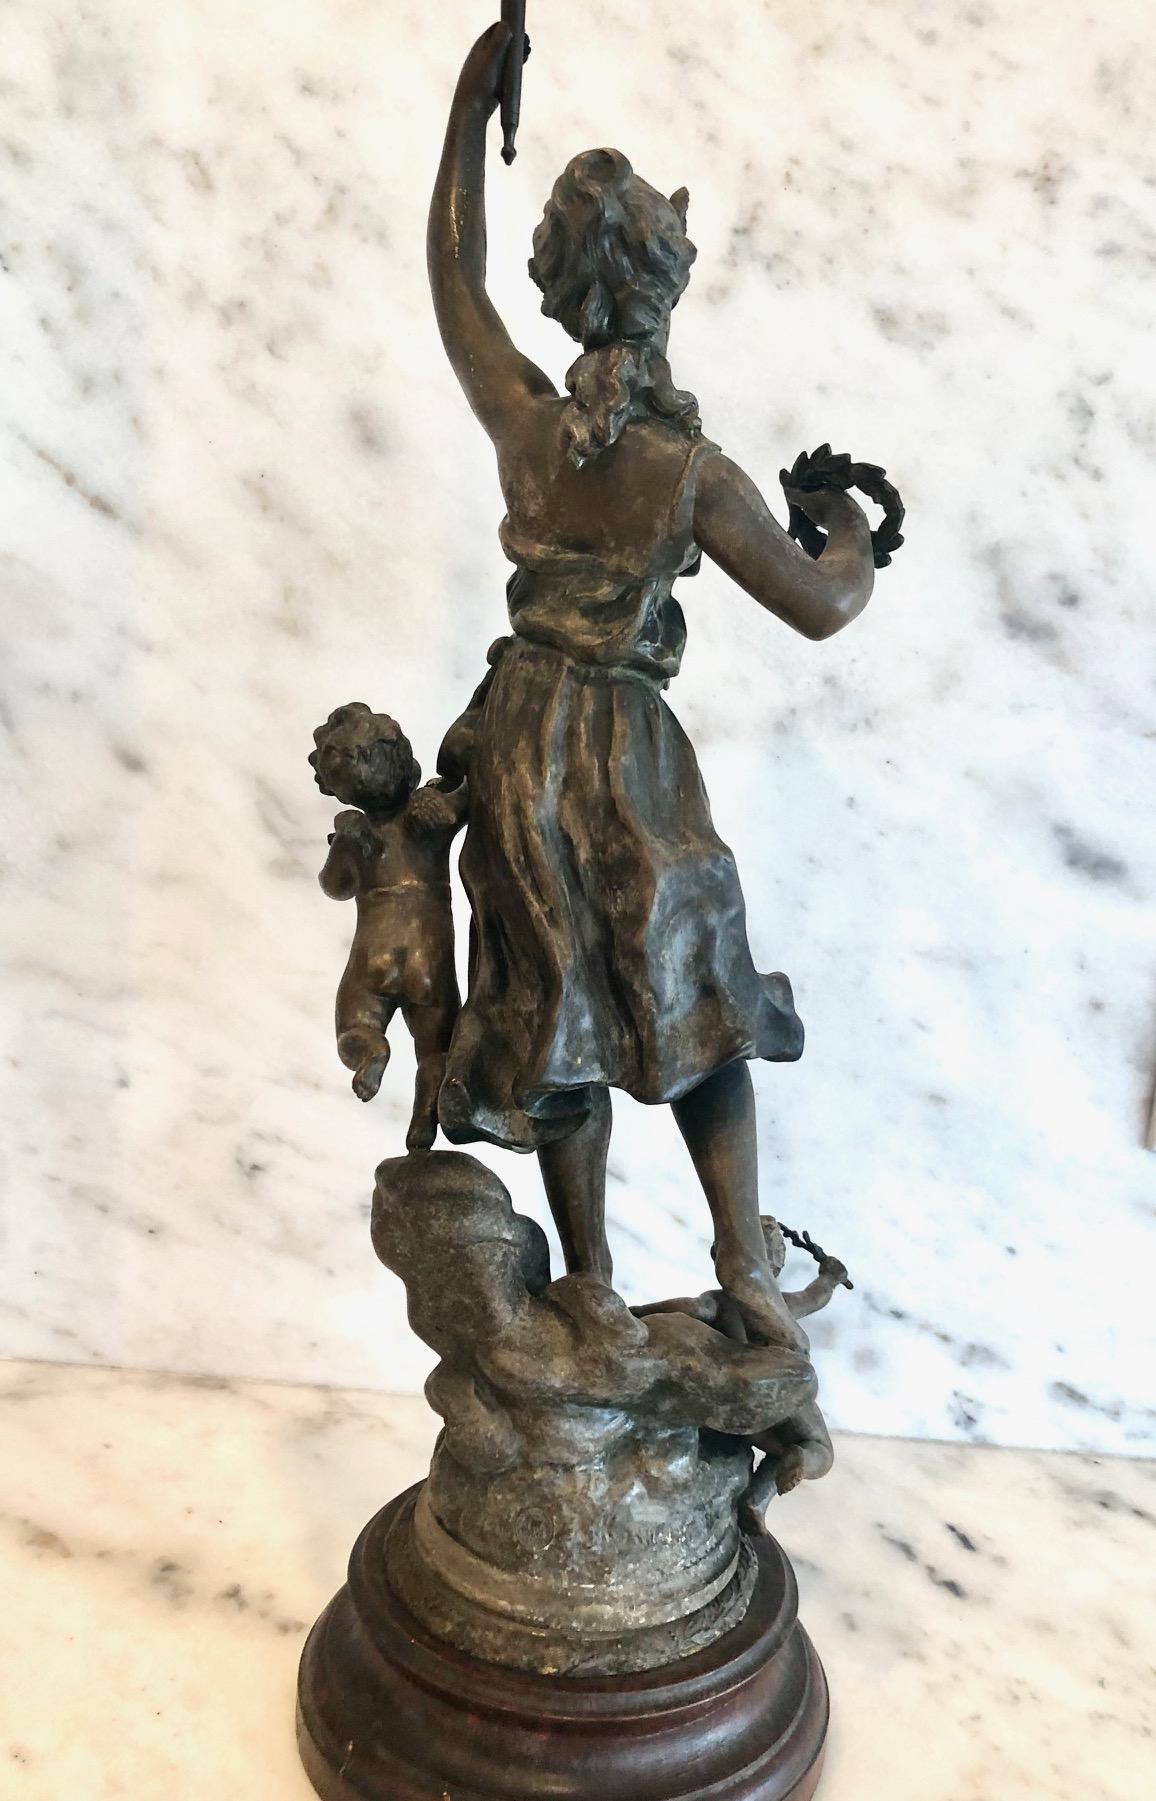 Stunning large bronze sculpture with brown patina titled Avenir et Fortune
(Future and good Fortune) depicting a proud beauty with raised arm holding a torch, accompanied by small putti at her side. Sculpture stands on an octagonal dark red veined